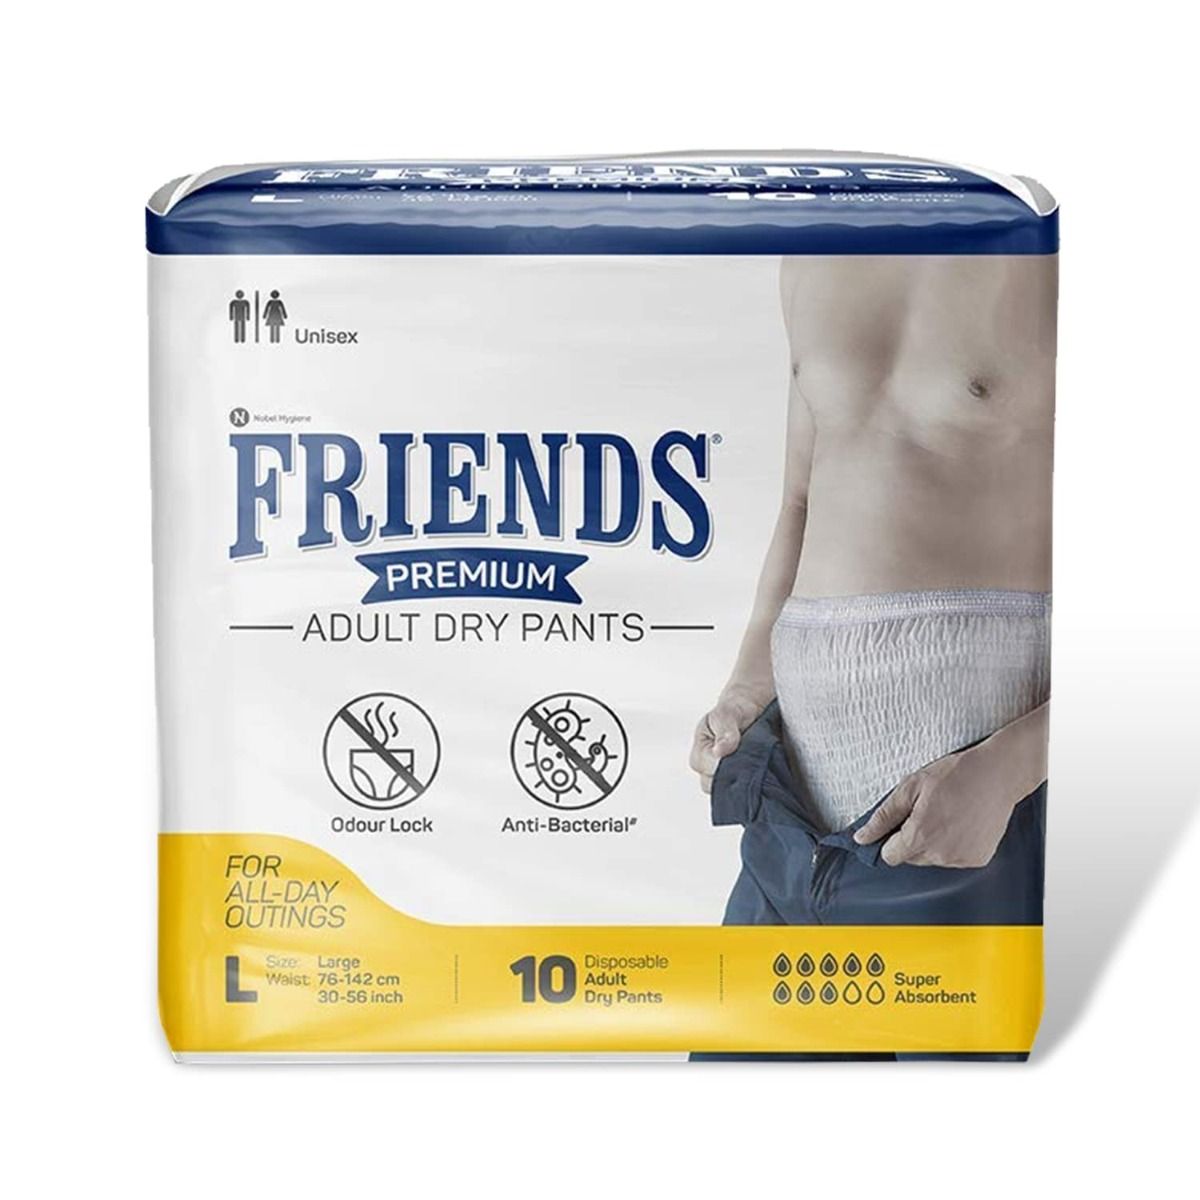 Friends Premium Adult Dry Pants Large, 10 Count, Pack of 1 